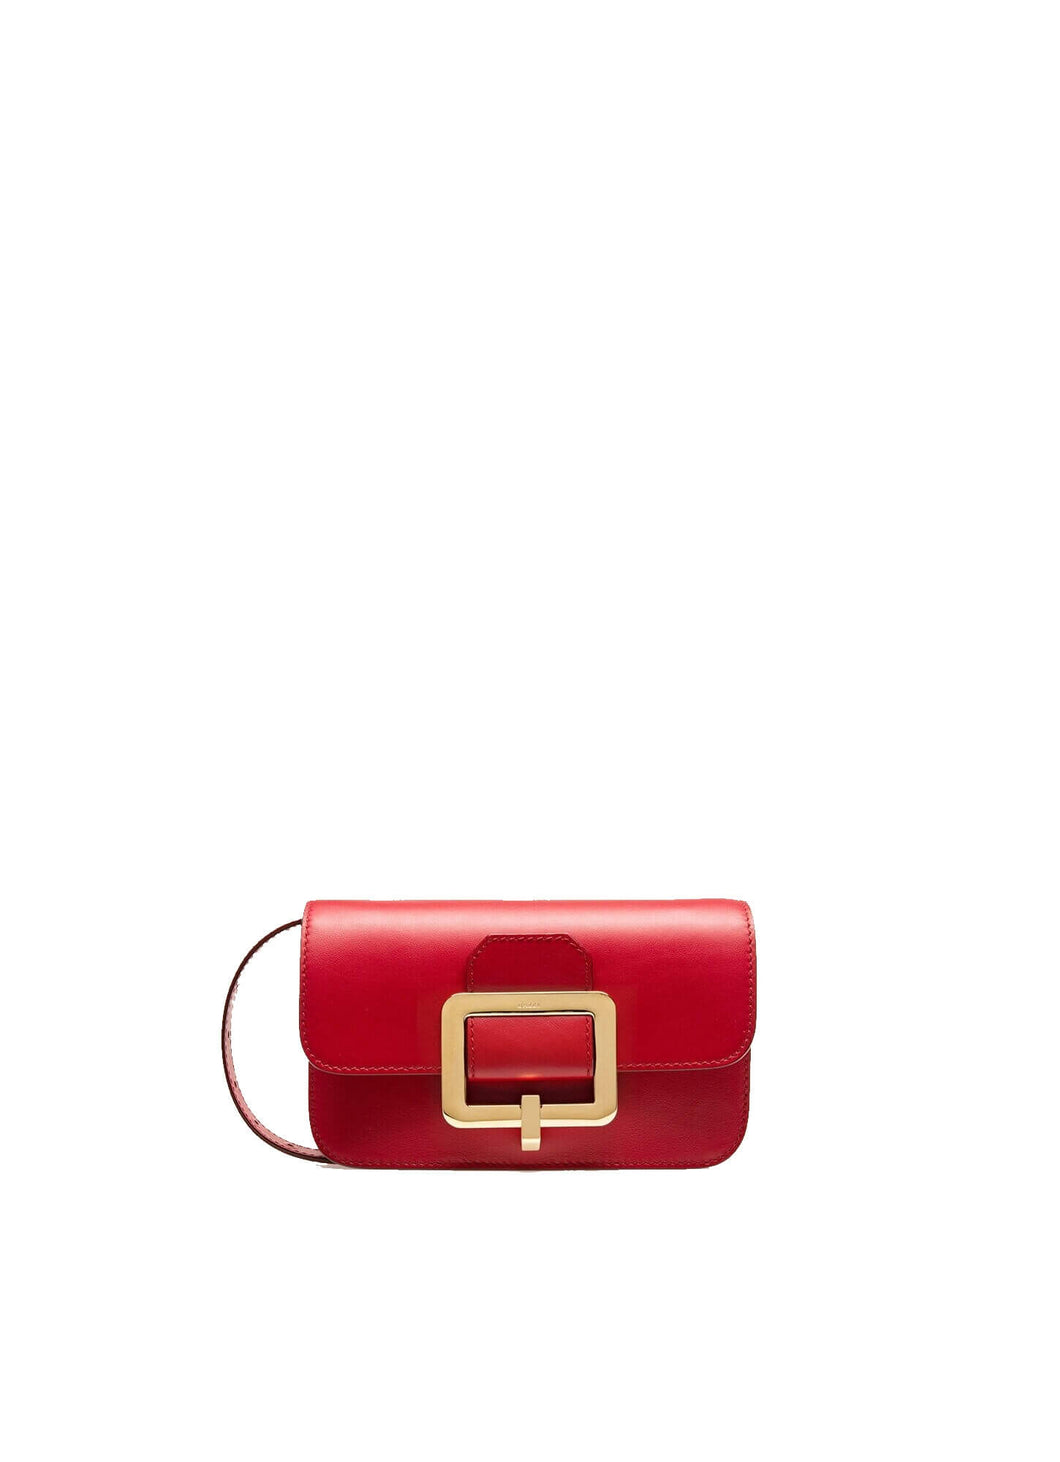 NEW Bally Janelle S Women's 6232461 Red Leather Minibag MSRP $990